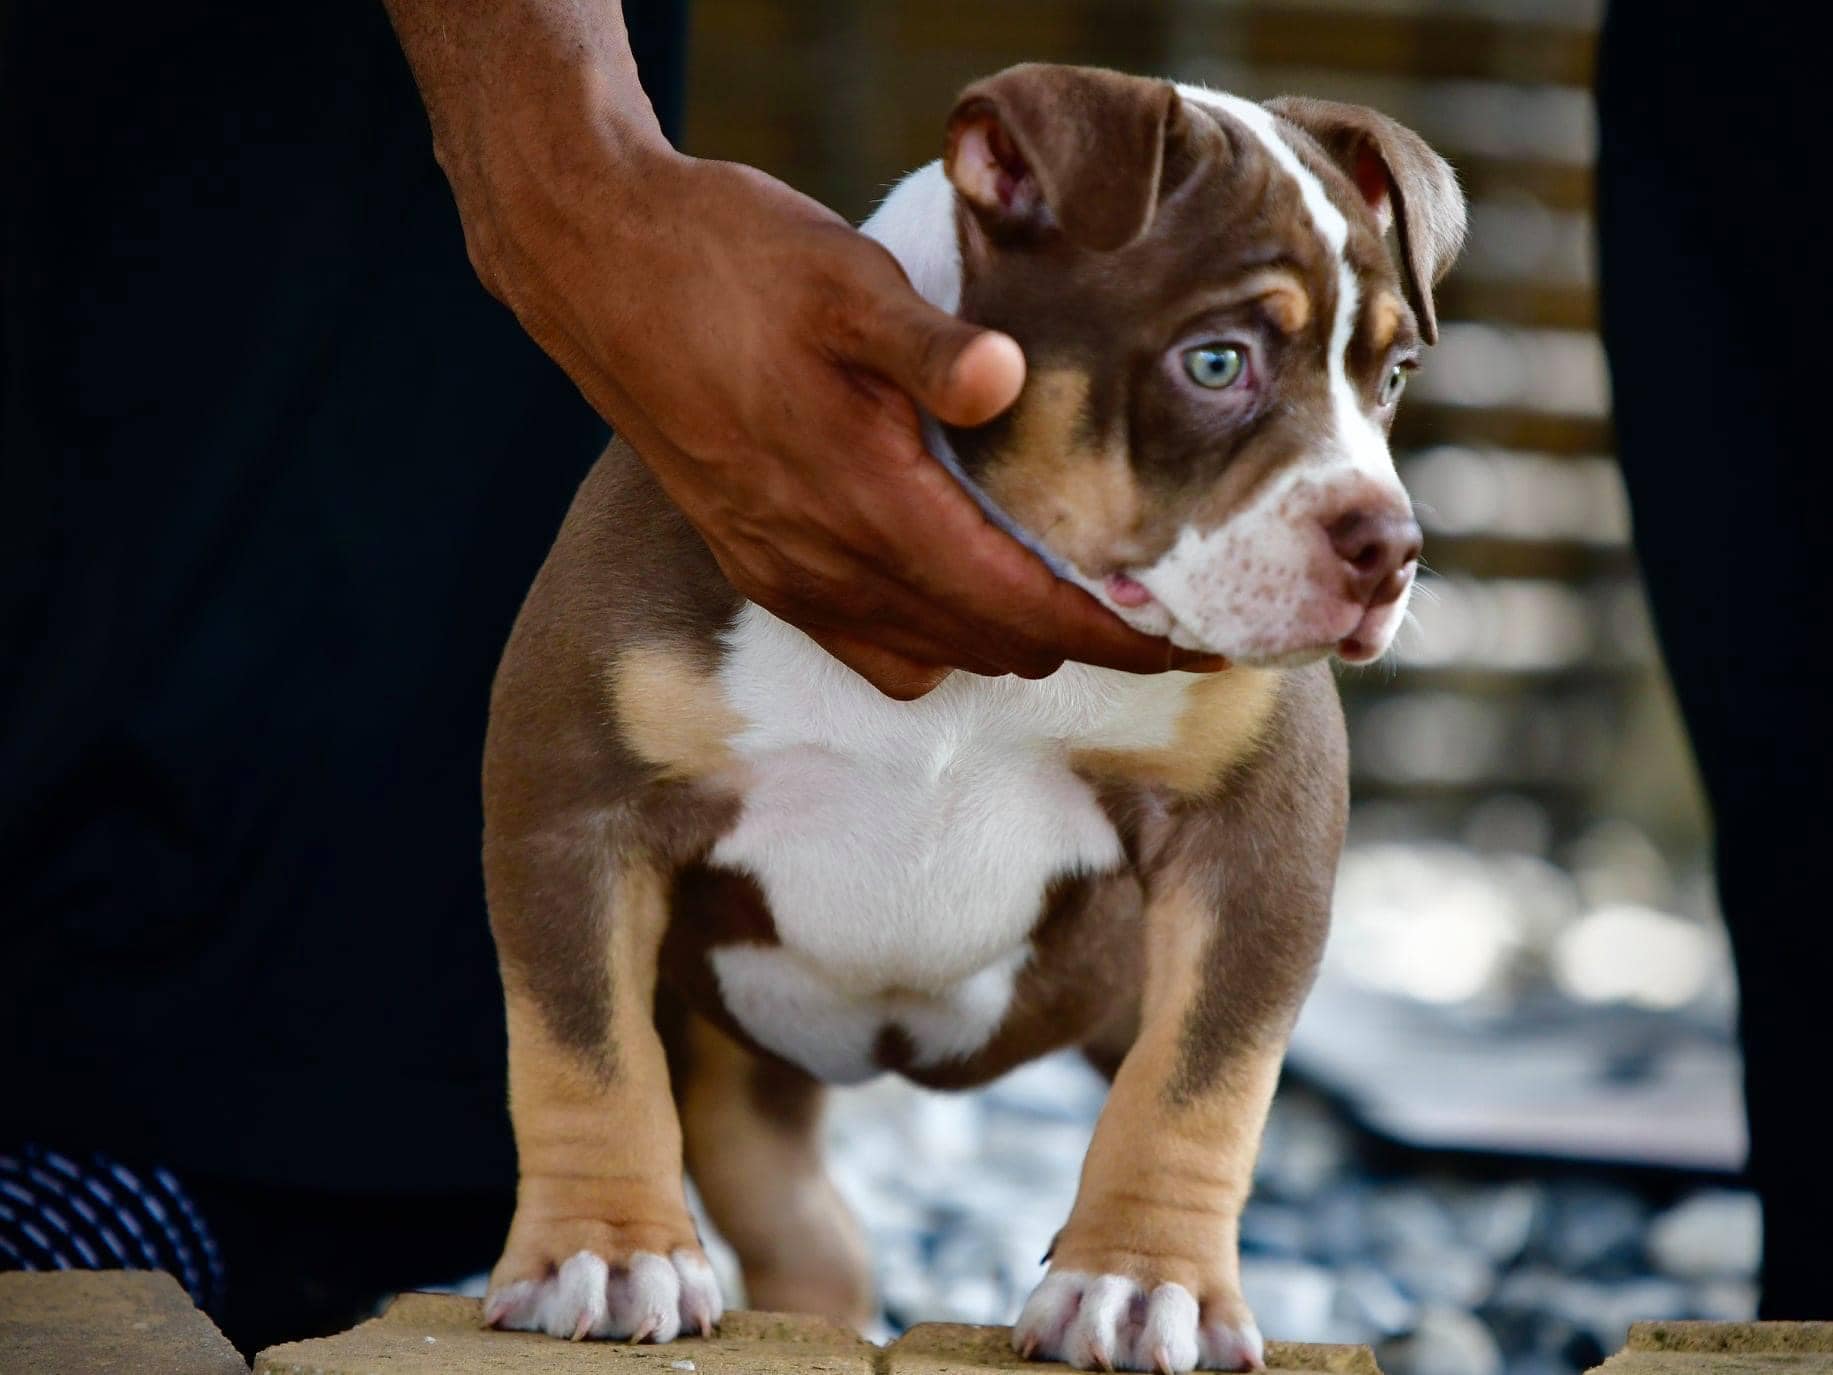 Pocket American Bully Puppies for Sale,  Extreme Pocket Bully, Venomline, American Bully Kennels, Best Pocket Bully Kennels, Pocket Bully Breeders, Pocket Bully Kennels, Top American Bully Breeders, Best Bully Bloodlines